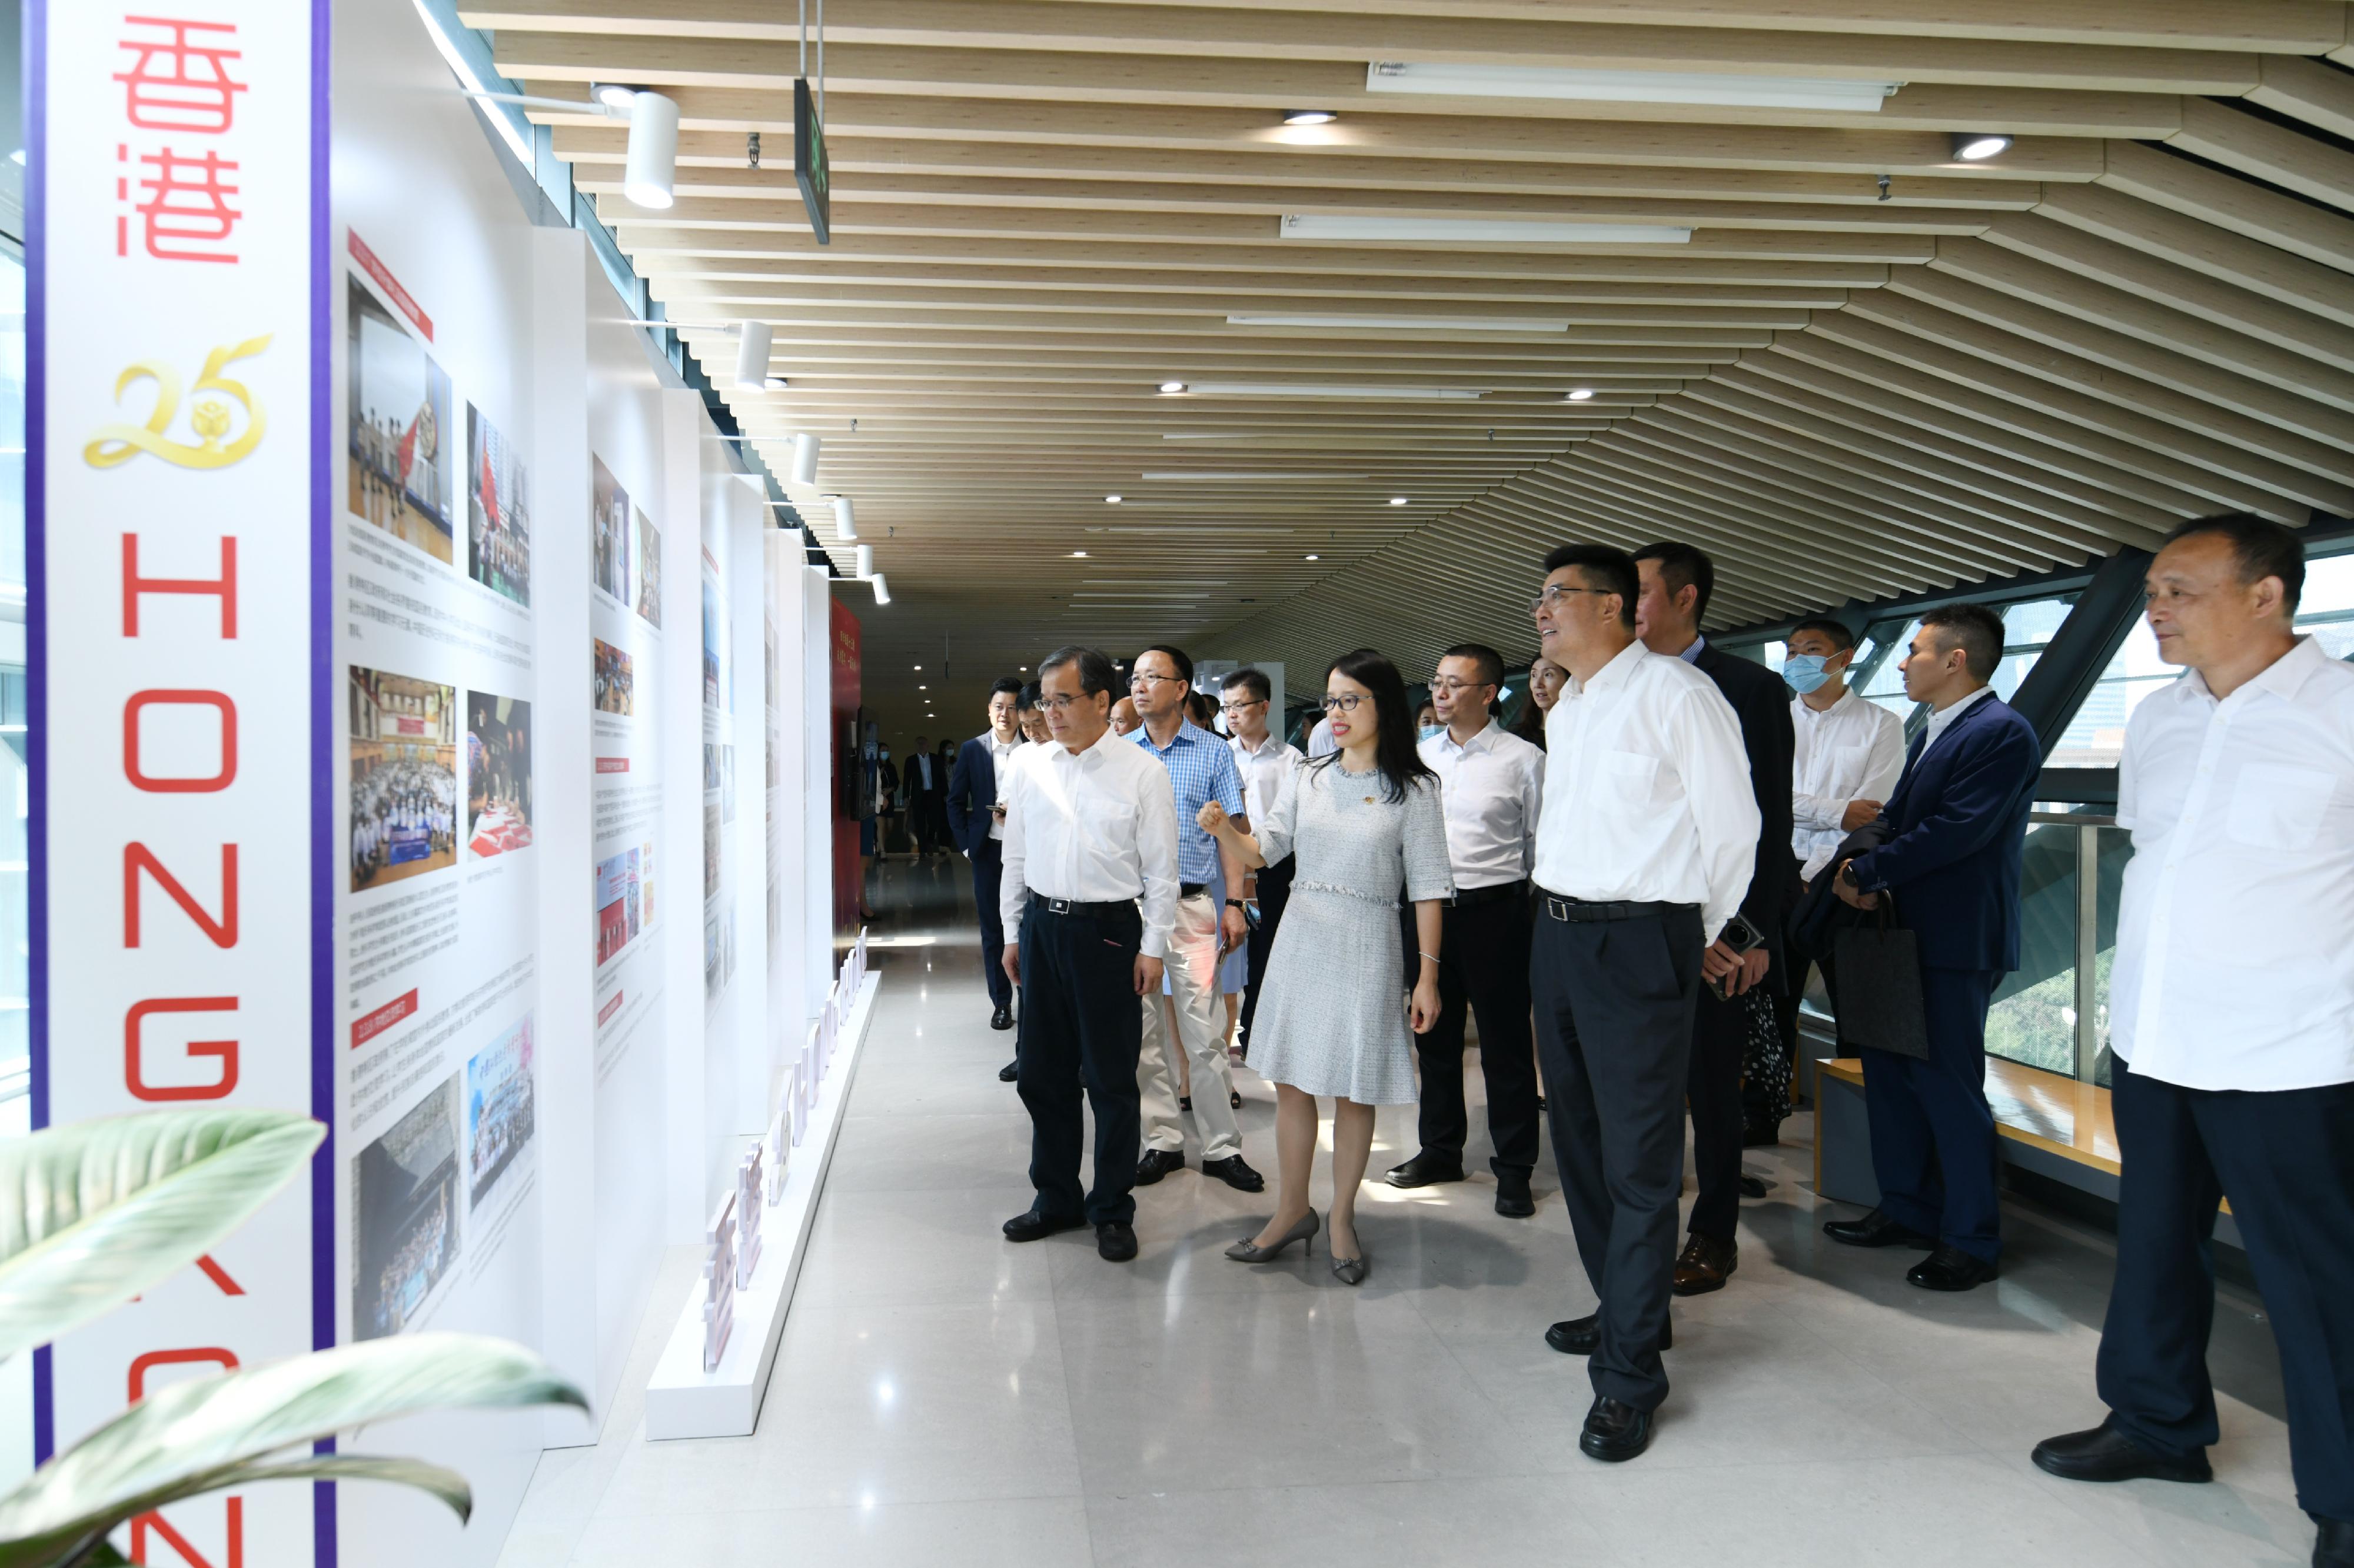 The Hong Kong Economic and Trade Office in Chengdu (CDETO) of the Government of the Hong Kong Special Administrative Region (HKSAR) has been holding a series of celebration activities since June to mark the 25th anniversary of the establishment of the HKSAR. Photo shows the Director of the CDETO, Miss Li Wan-in (front row, second left), touring the CDETO's roving exhibition on the 25th anniversary of Hong Kong's return to the motherland with other guests in Chengdu today (July 11). 